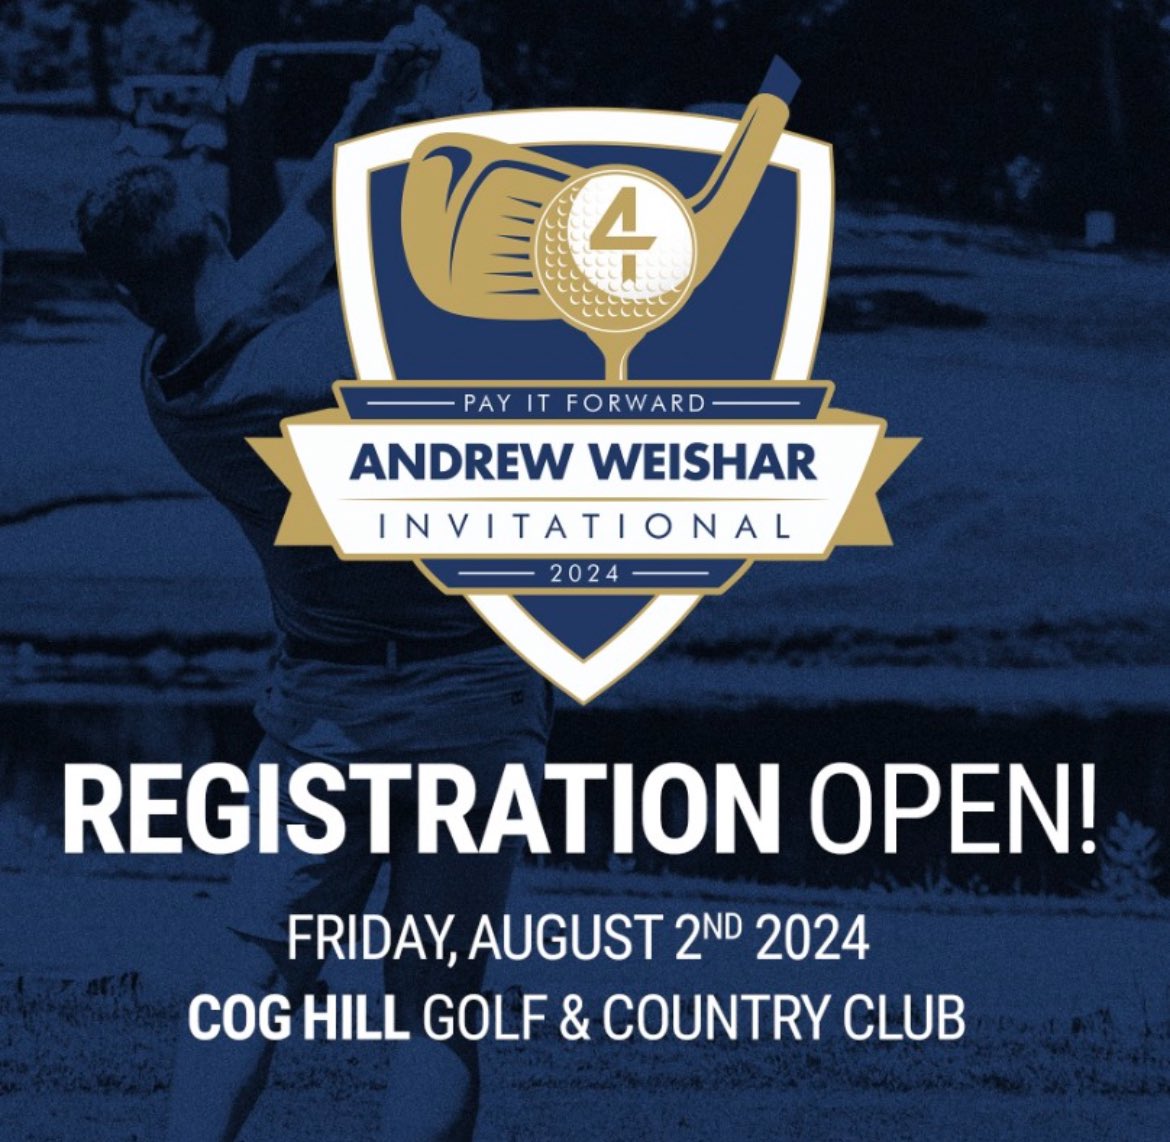 REGISTRATION IS OPEN! Grab your spot for AWI 2024 before it’s too late: andrewweisharinvitational.com. 

#golfouting #payitforward #charitygolf